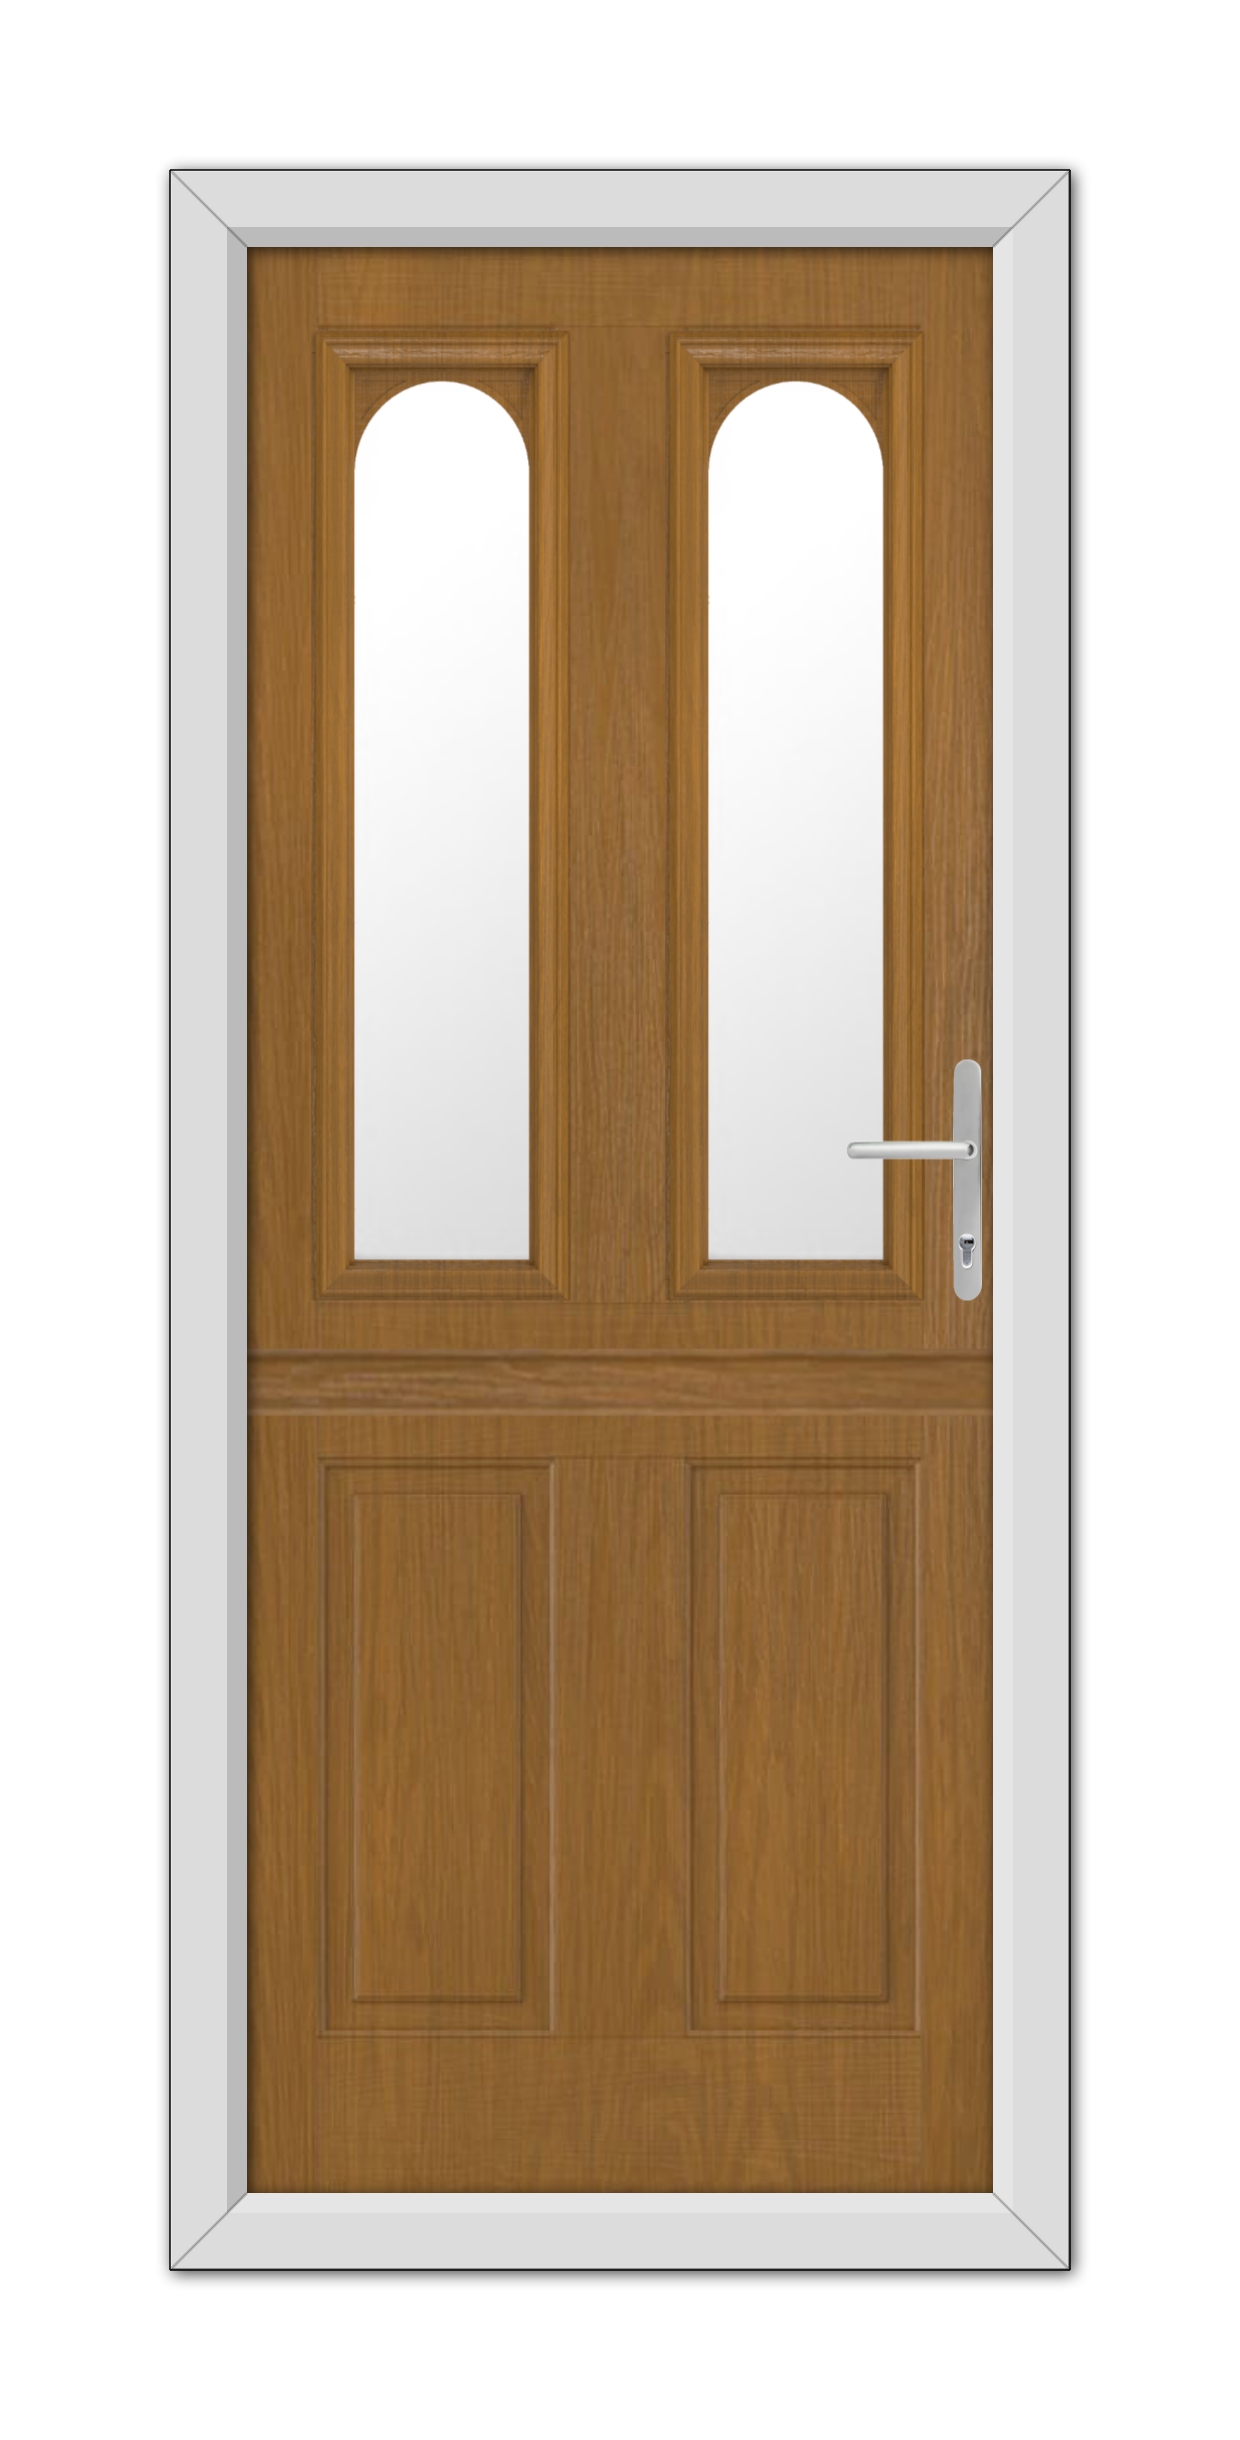 A Oak Elmhurst Stable Composite Door 48mm Timber Core with two top arched glass panels, framed in white, featuring a modern handle on the right.